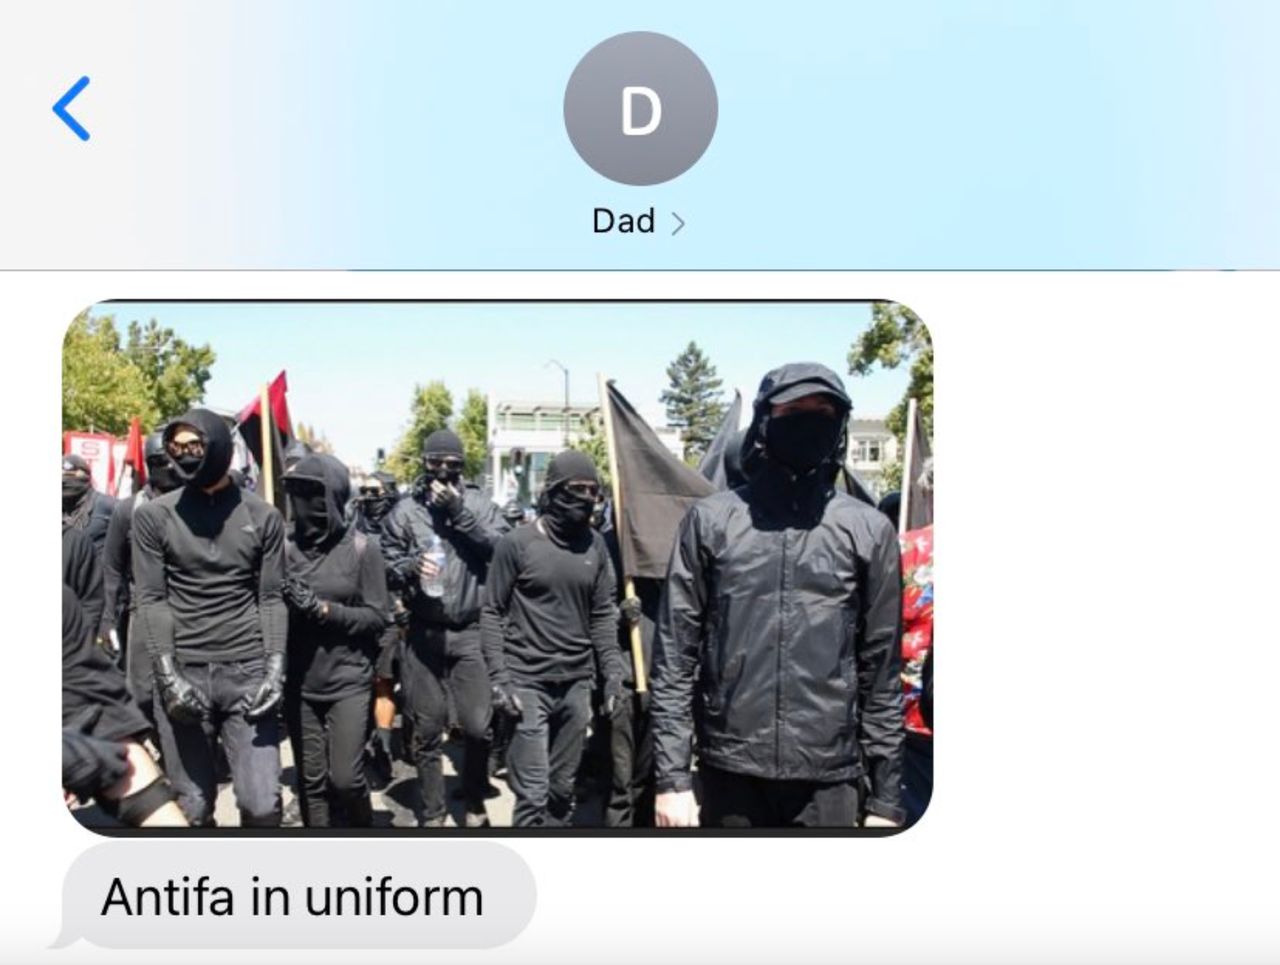 Sabrina's father texted this photo to her amid a stream of links to videos spreading conspiracy theories about antifa.